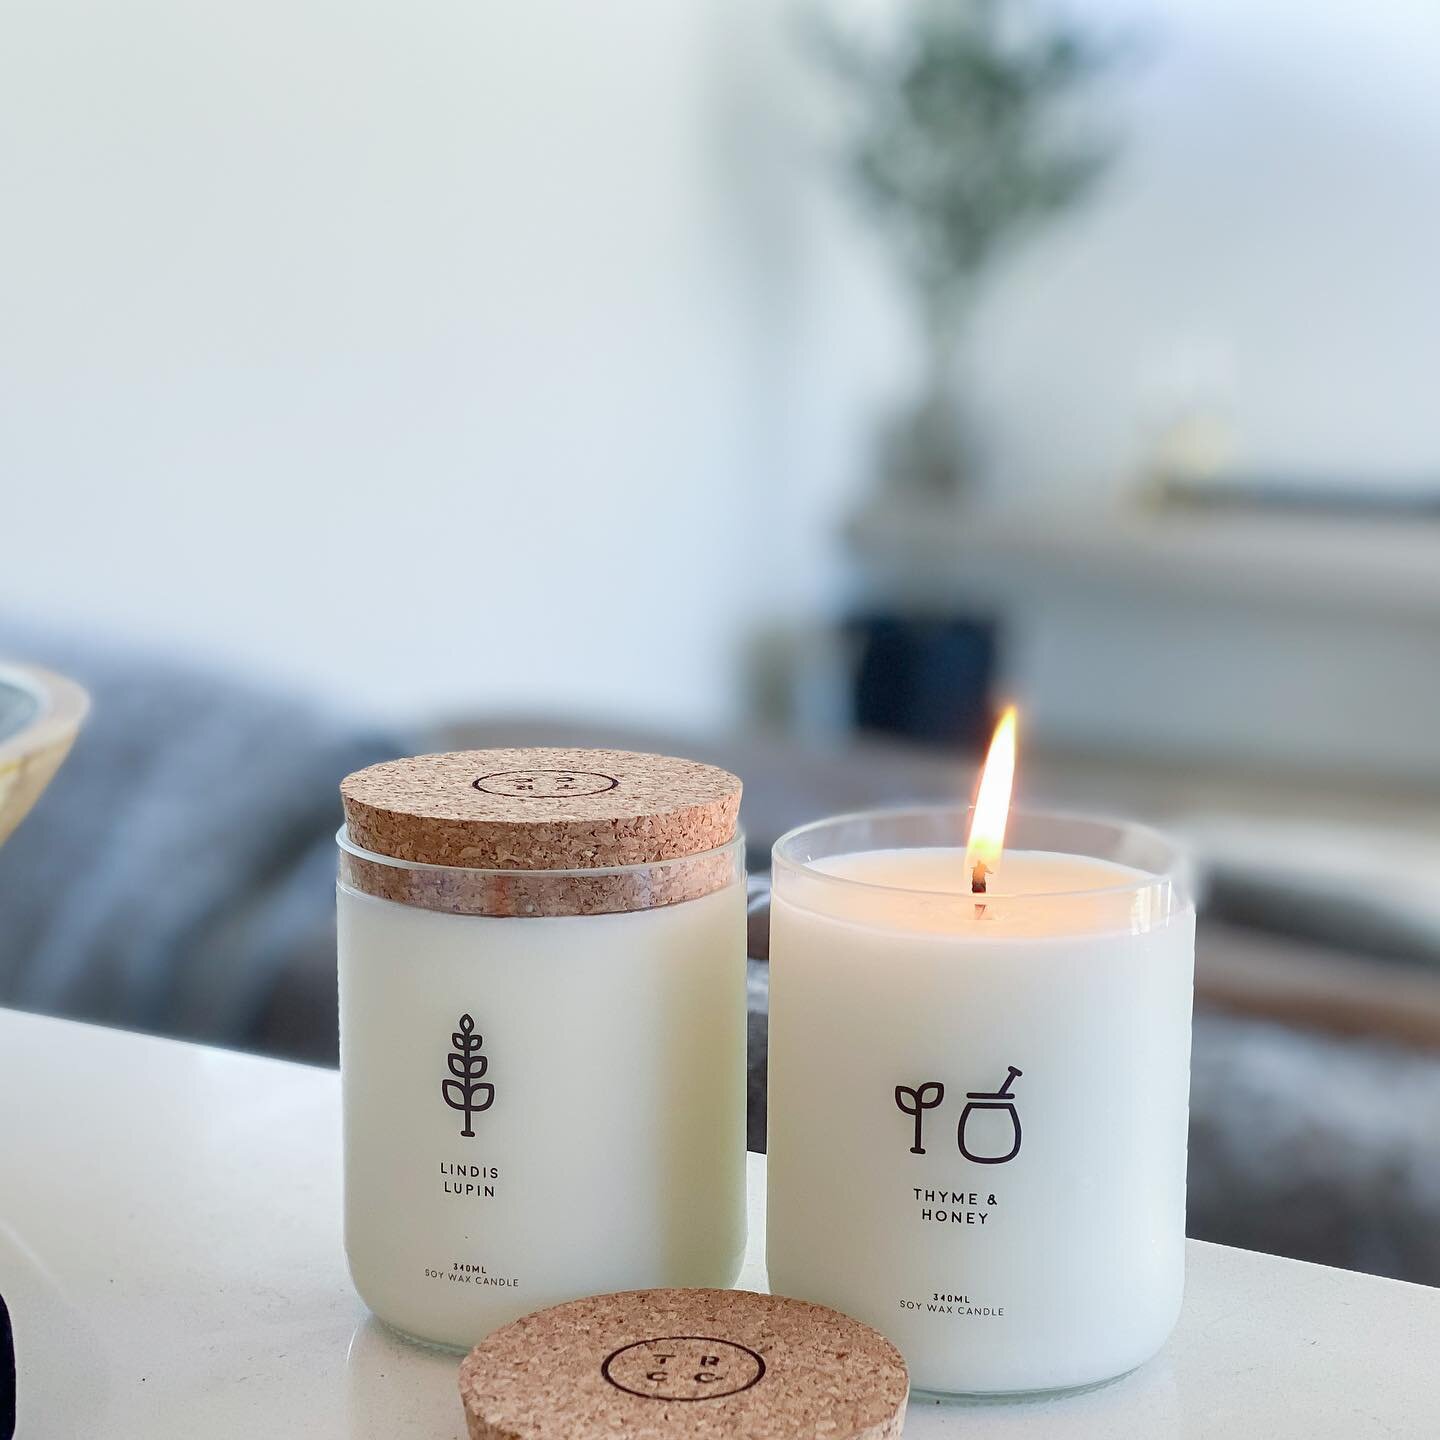 W E  L O V E local products! These beauties give our home such an elegant scent, we were gifted both candles from @theremarkablecandleco by entering their Instagram competition. Super grateful. Head to their account to see their entire range. 🕯 
&bu